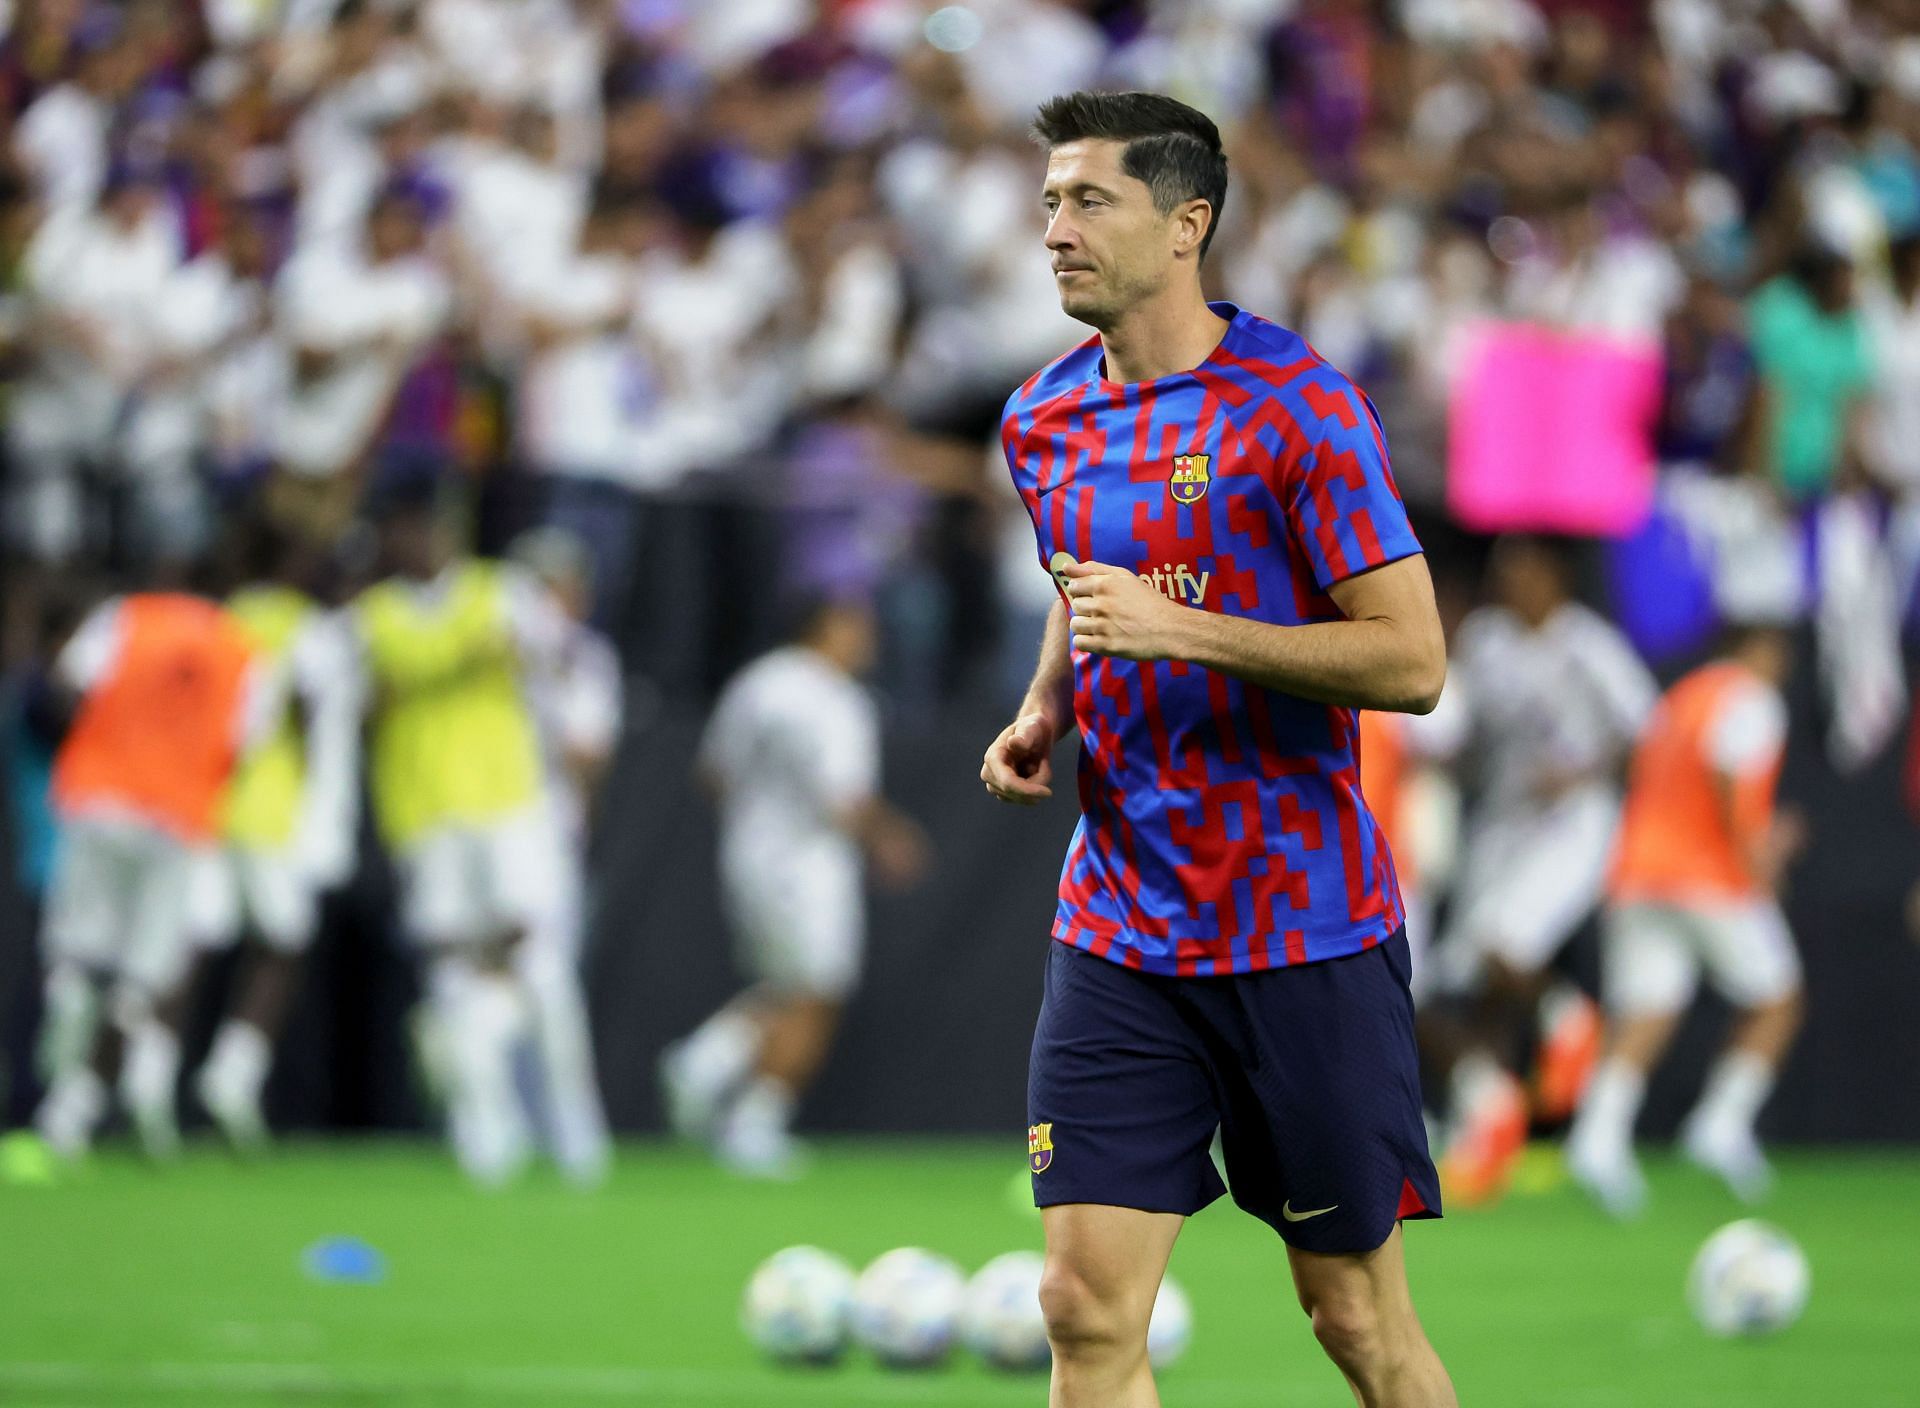 The striker is gradually settling down with Barcelona